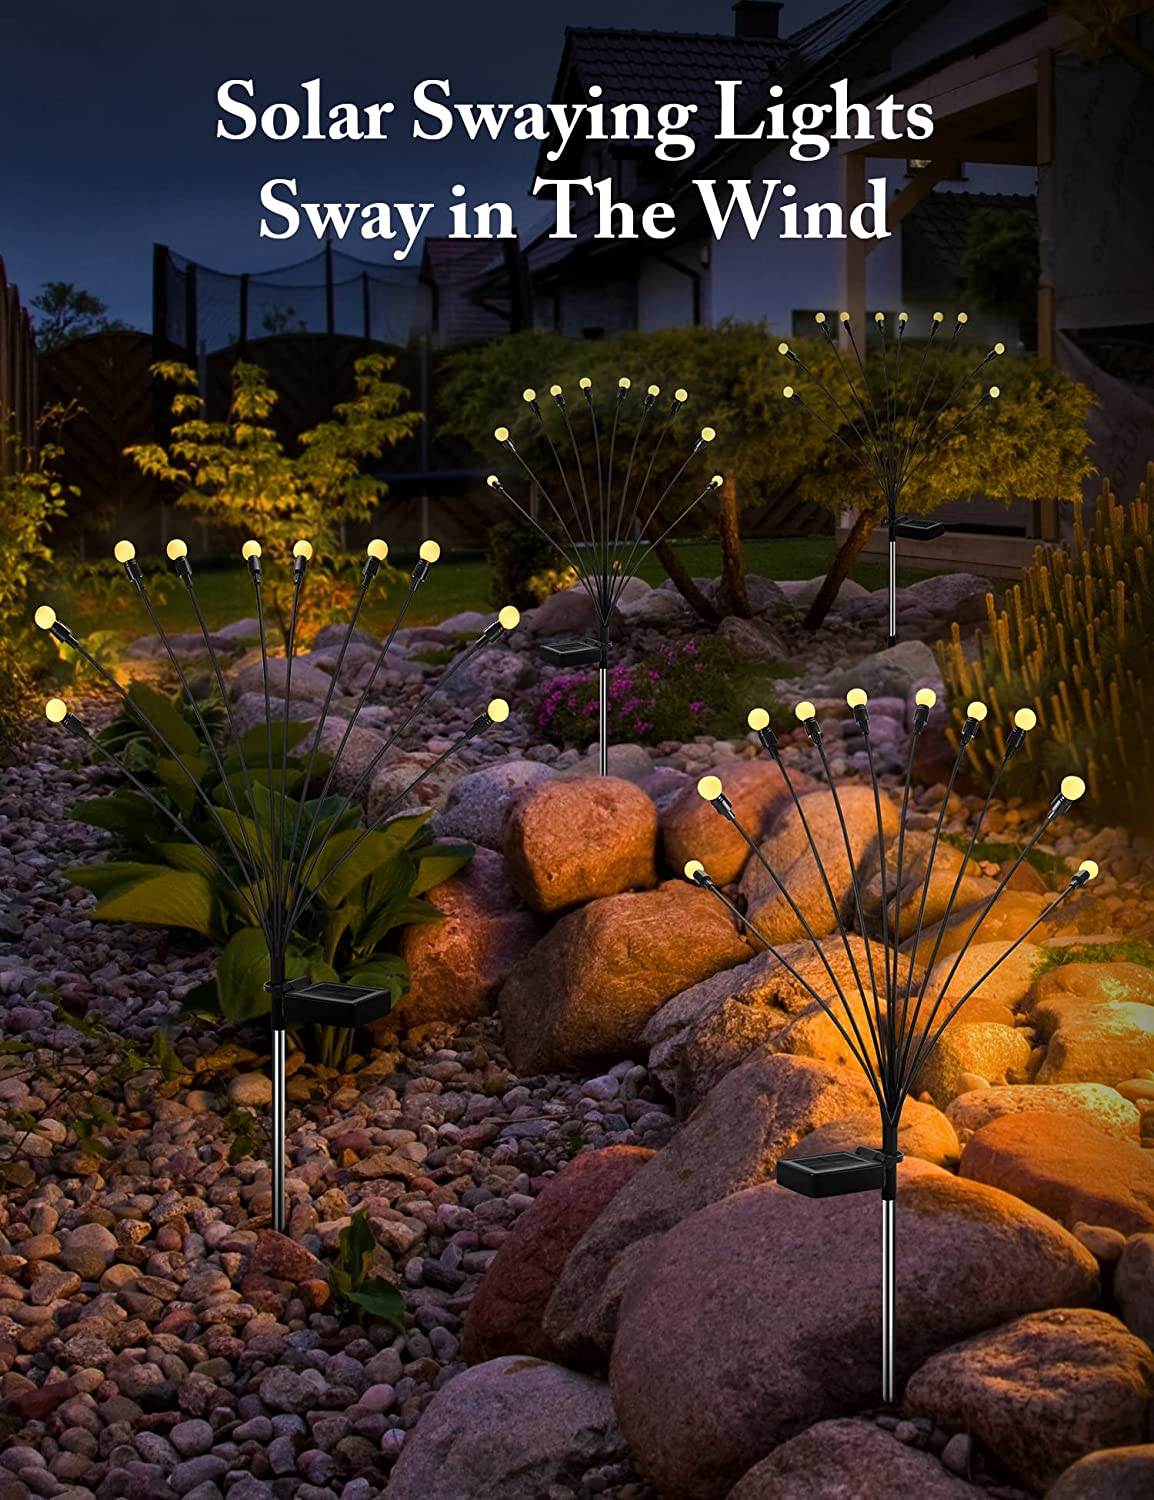 8Pack Solar Firefly Light, Solar Swaying Lights Sway in The